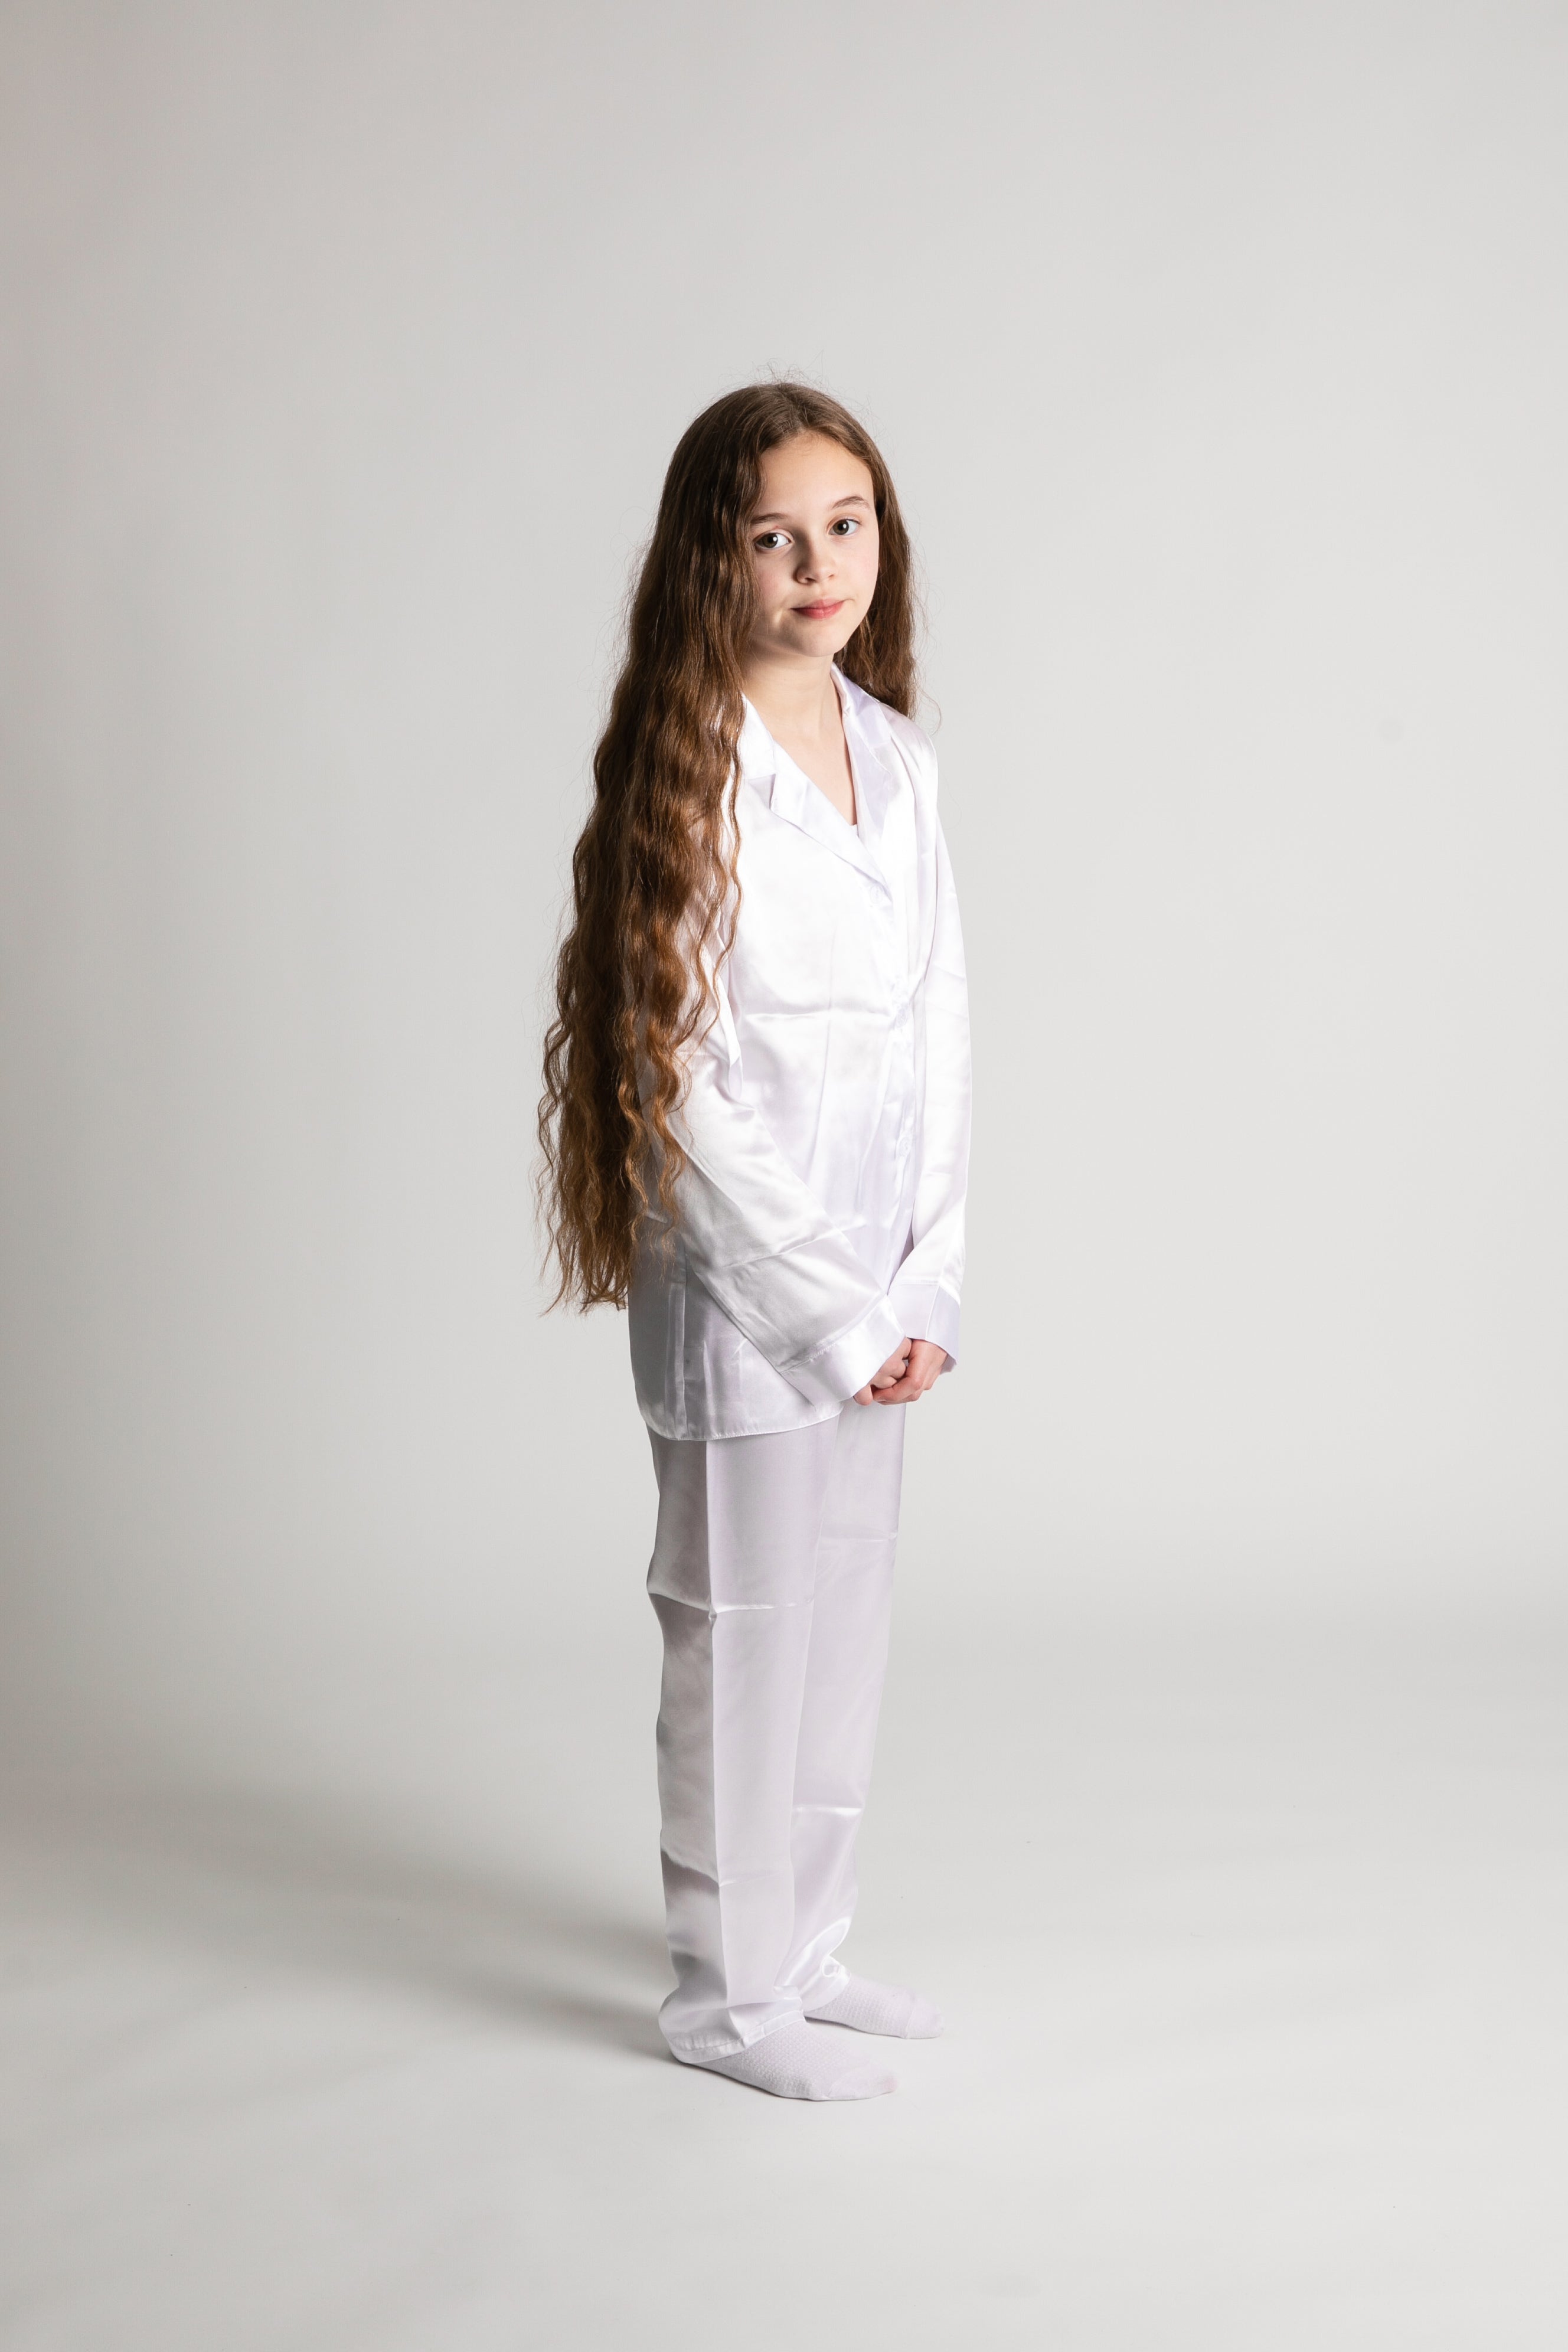 Personalised Communion Pyjamas long or short with wreath